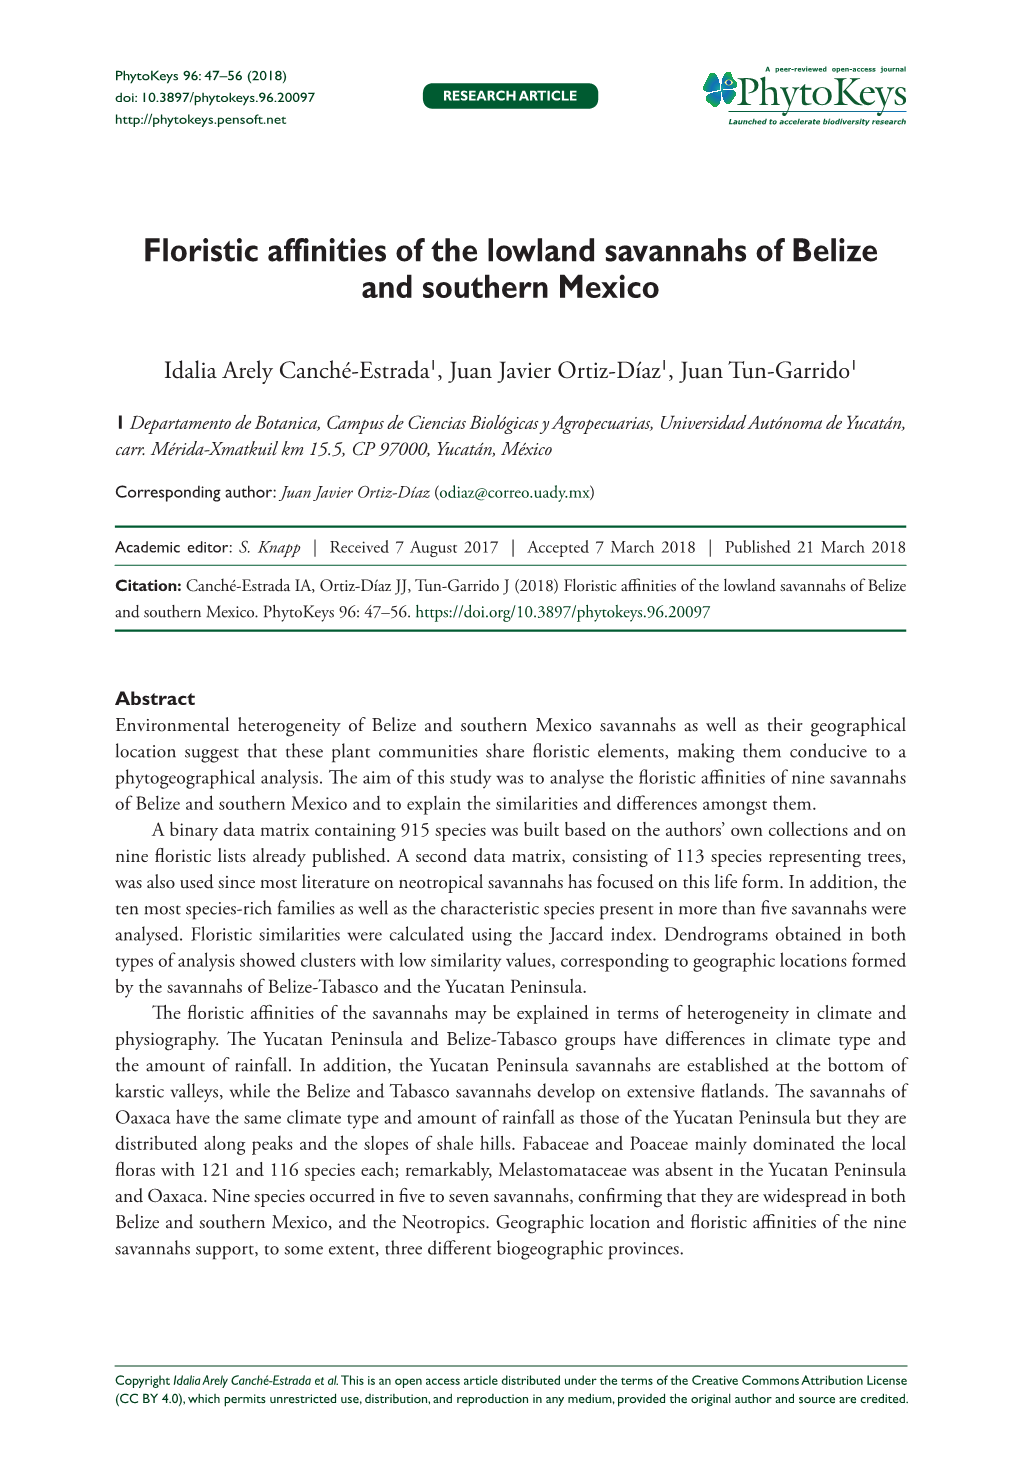 Floristic Affinities of the Lowland Savannahs of Belize and Southern Mexico